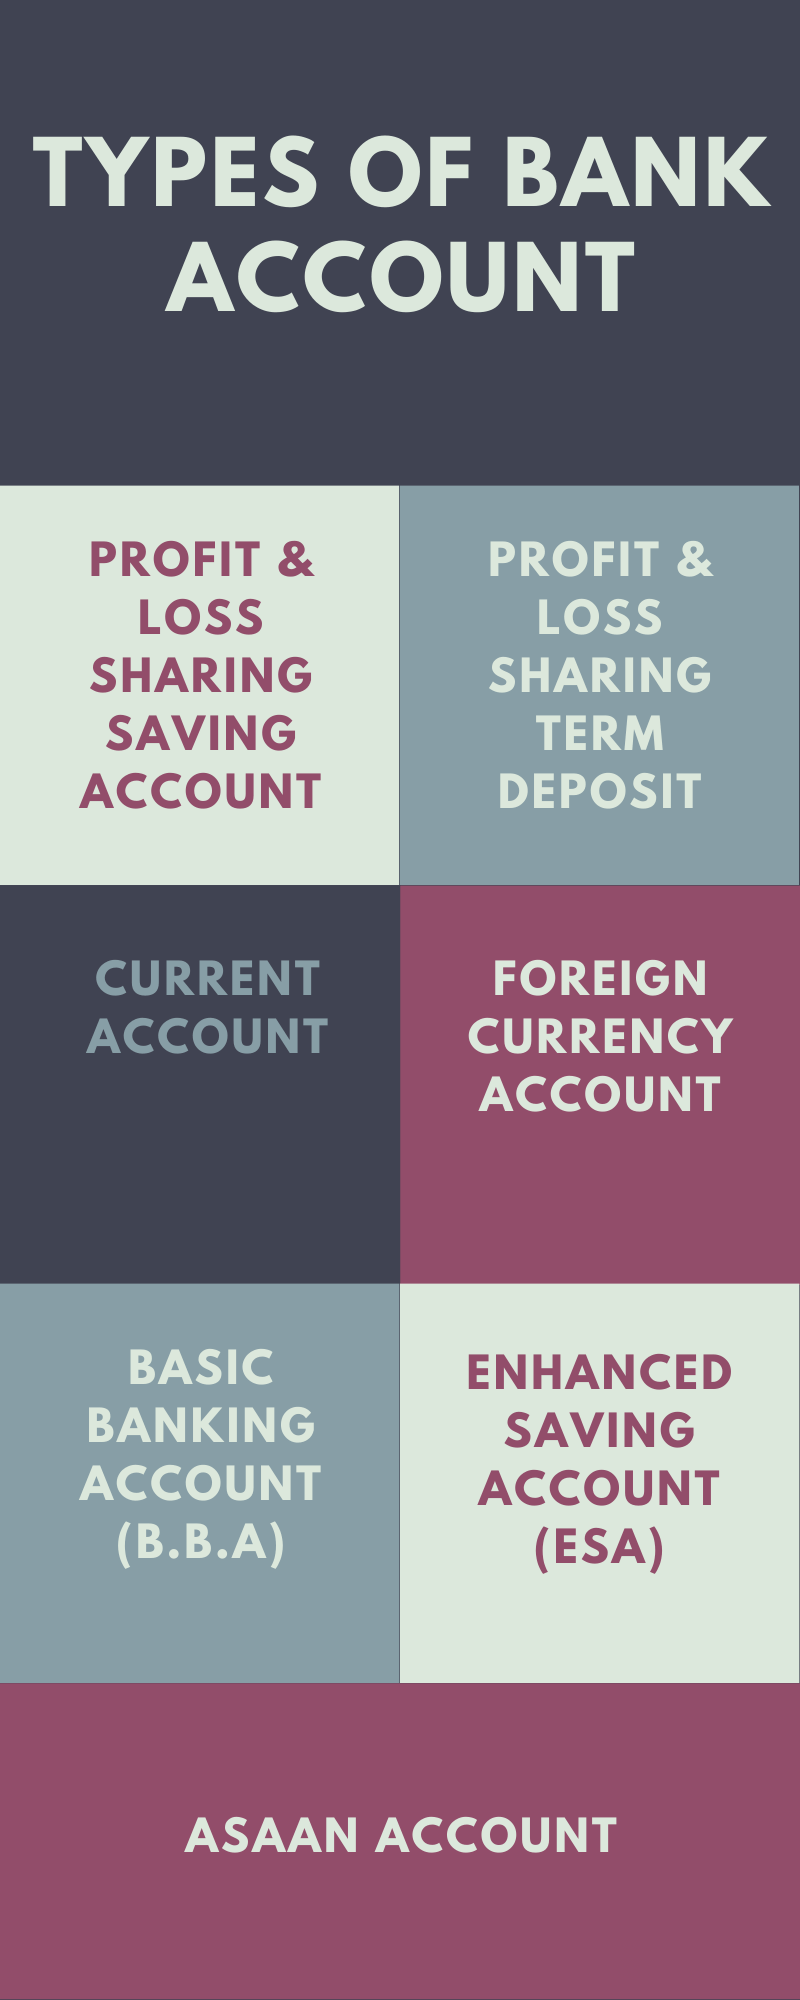 Types of bank account